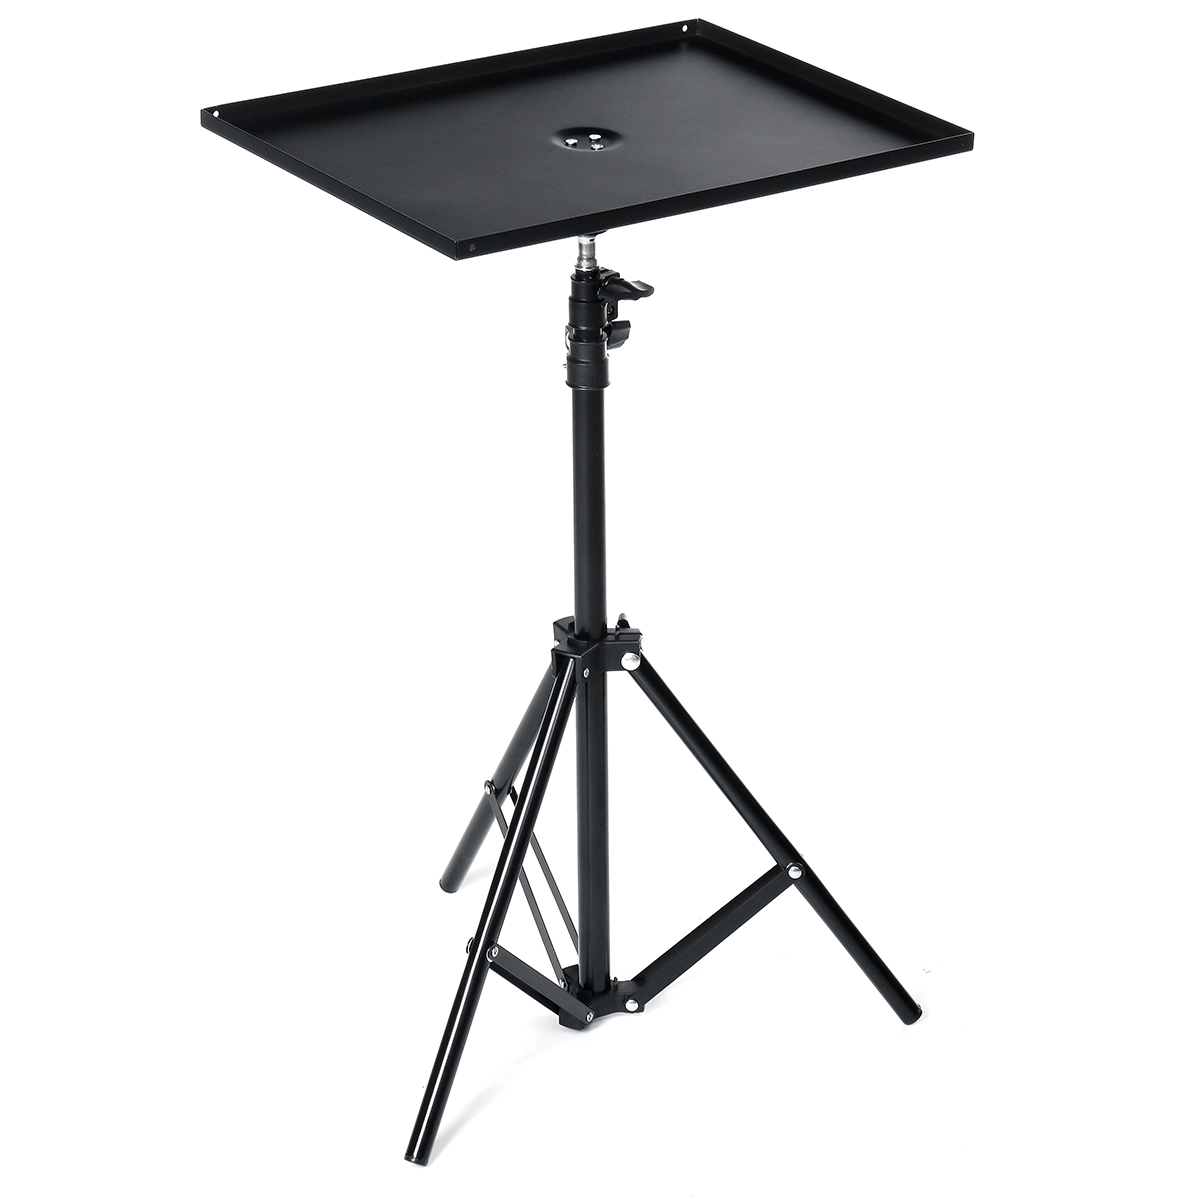 Find 1pc Projector Laptop Stand Portable Camera Stand Tray Tripod Adjustable Notebook Computer Stand Home Yard Outdoor Projector Supplies for Sale on Gipsybee.com with cryptocurrencies